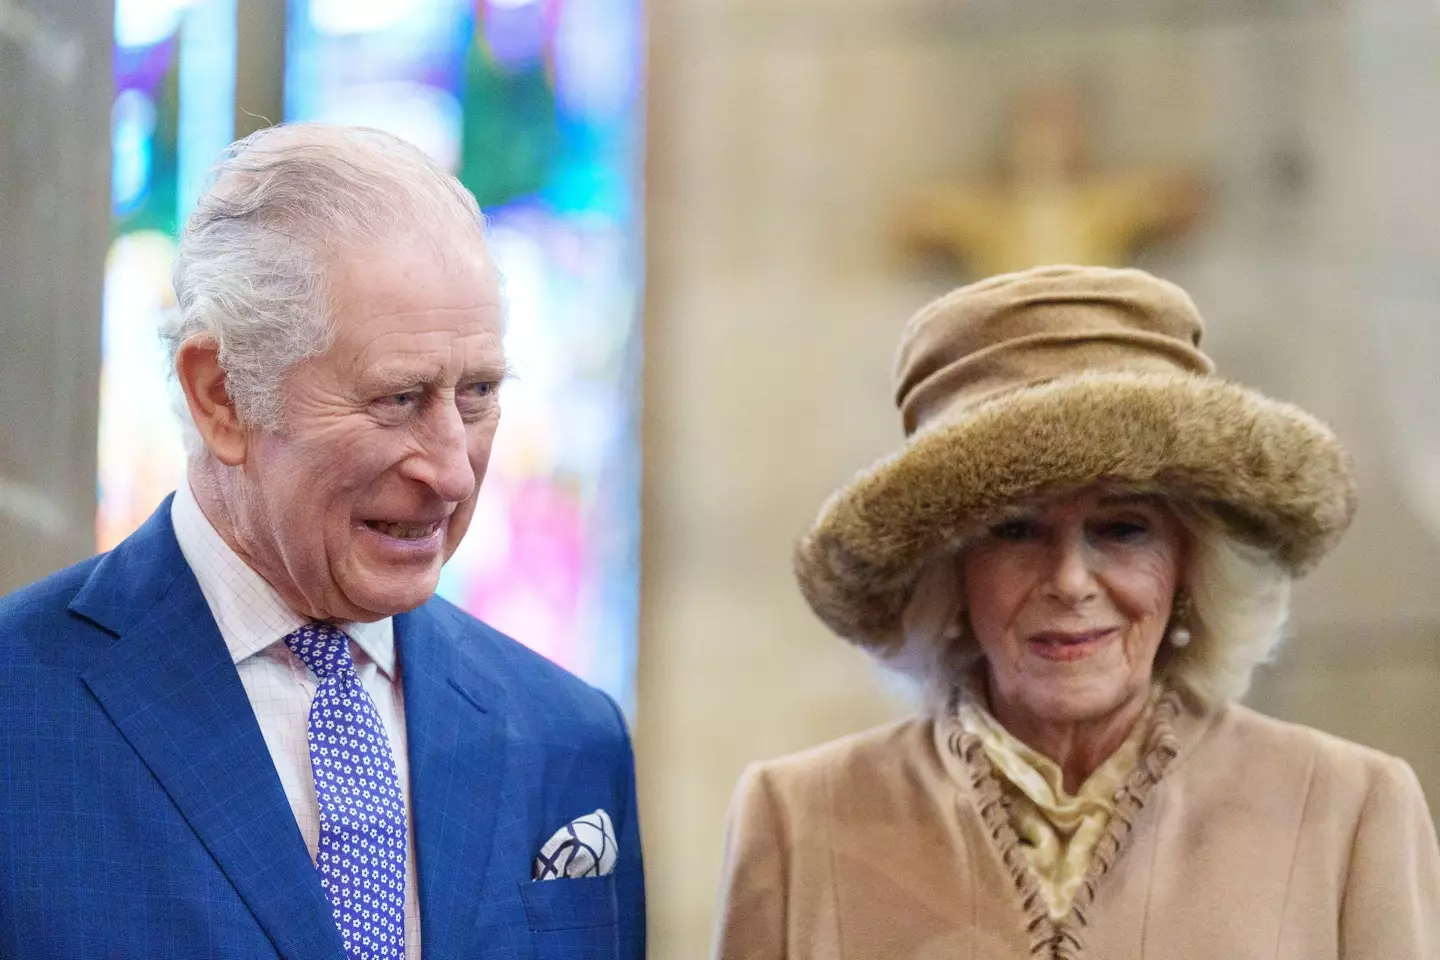 King Charles and Camilla attending a celebration this month marking Wrexham becoming a city.